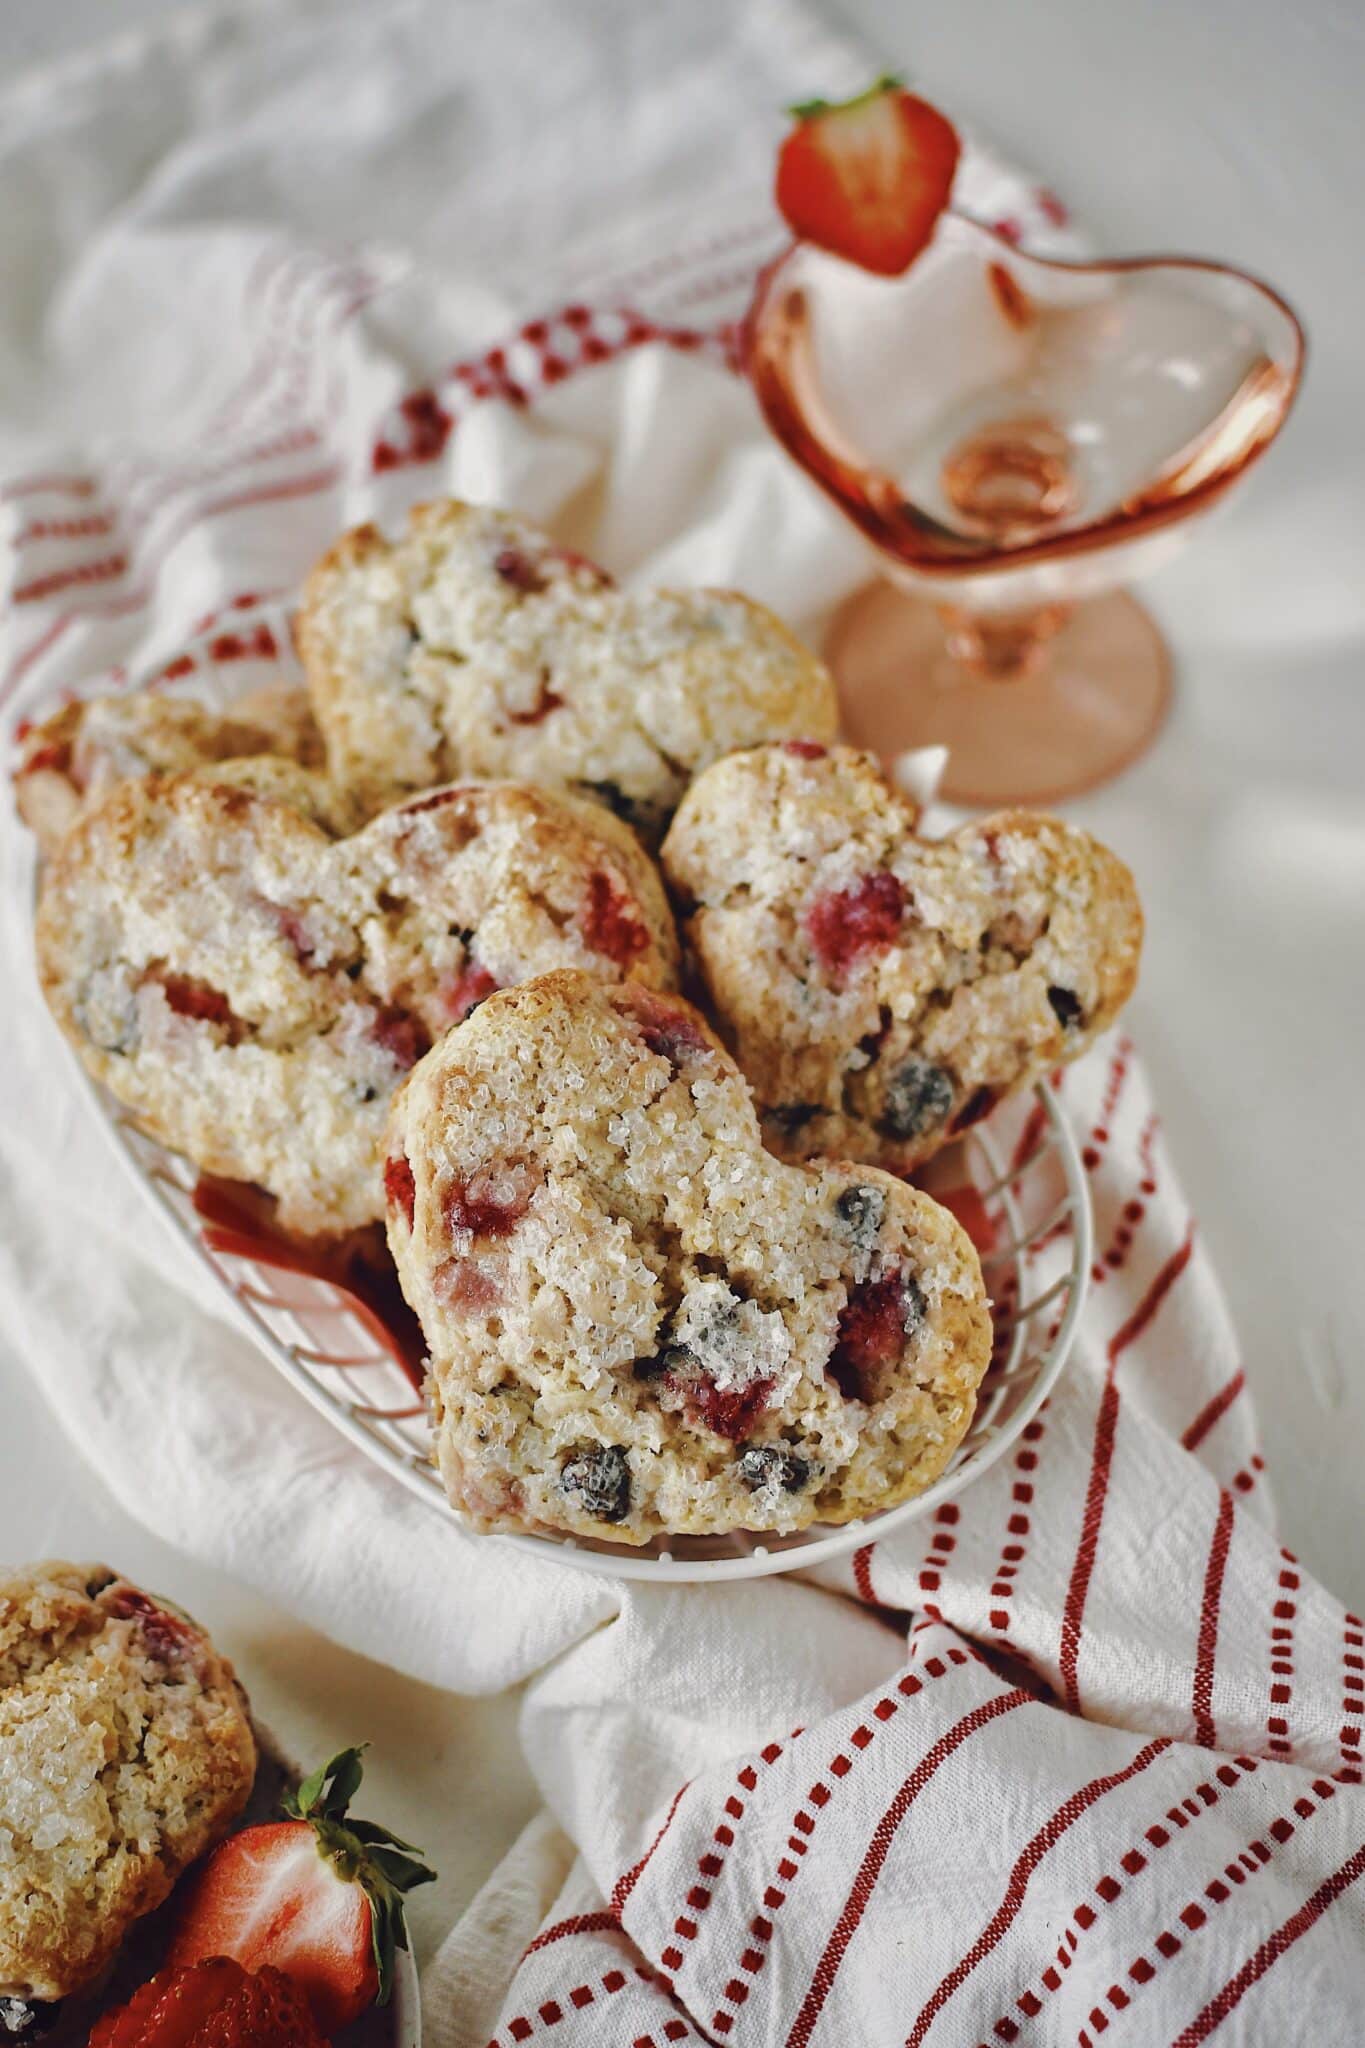 Strawberry Scones that have been cut into the shape of hearts in a basket ready to eat.